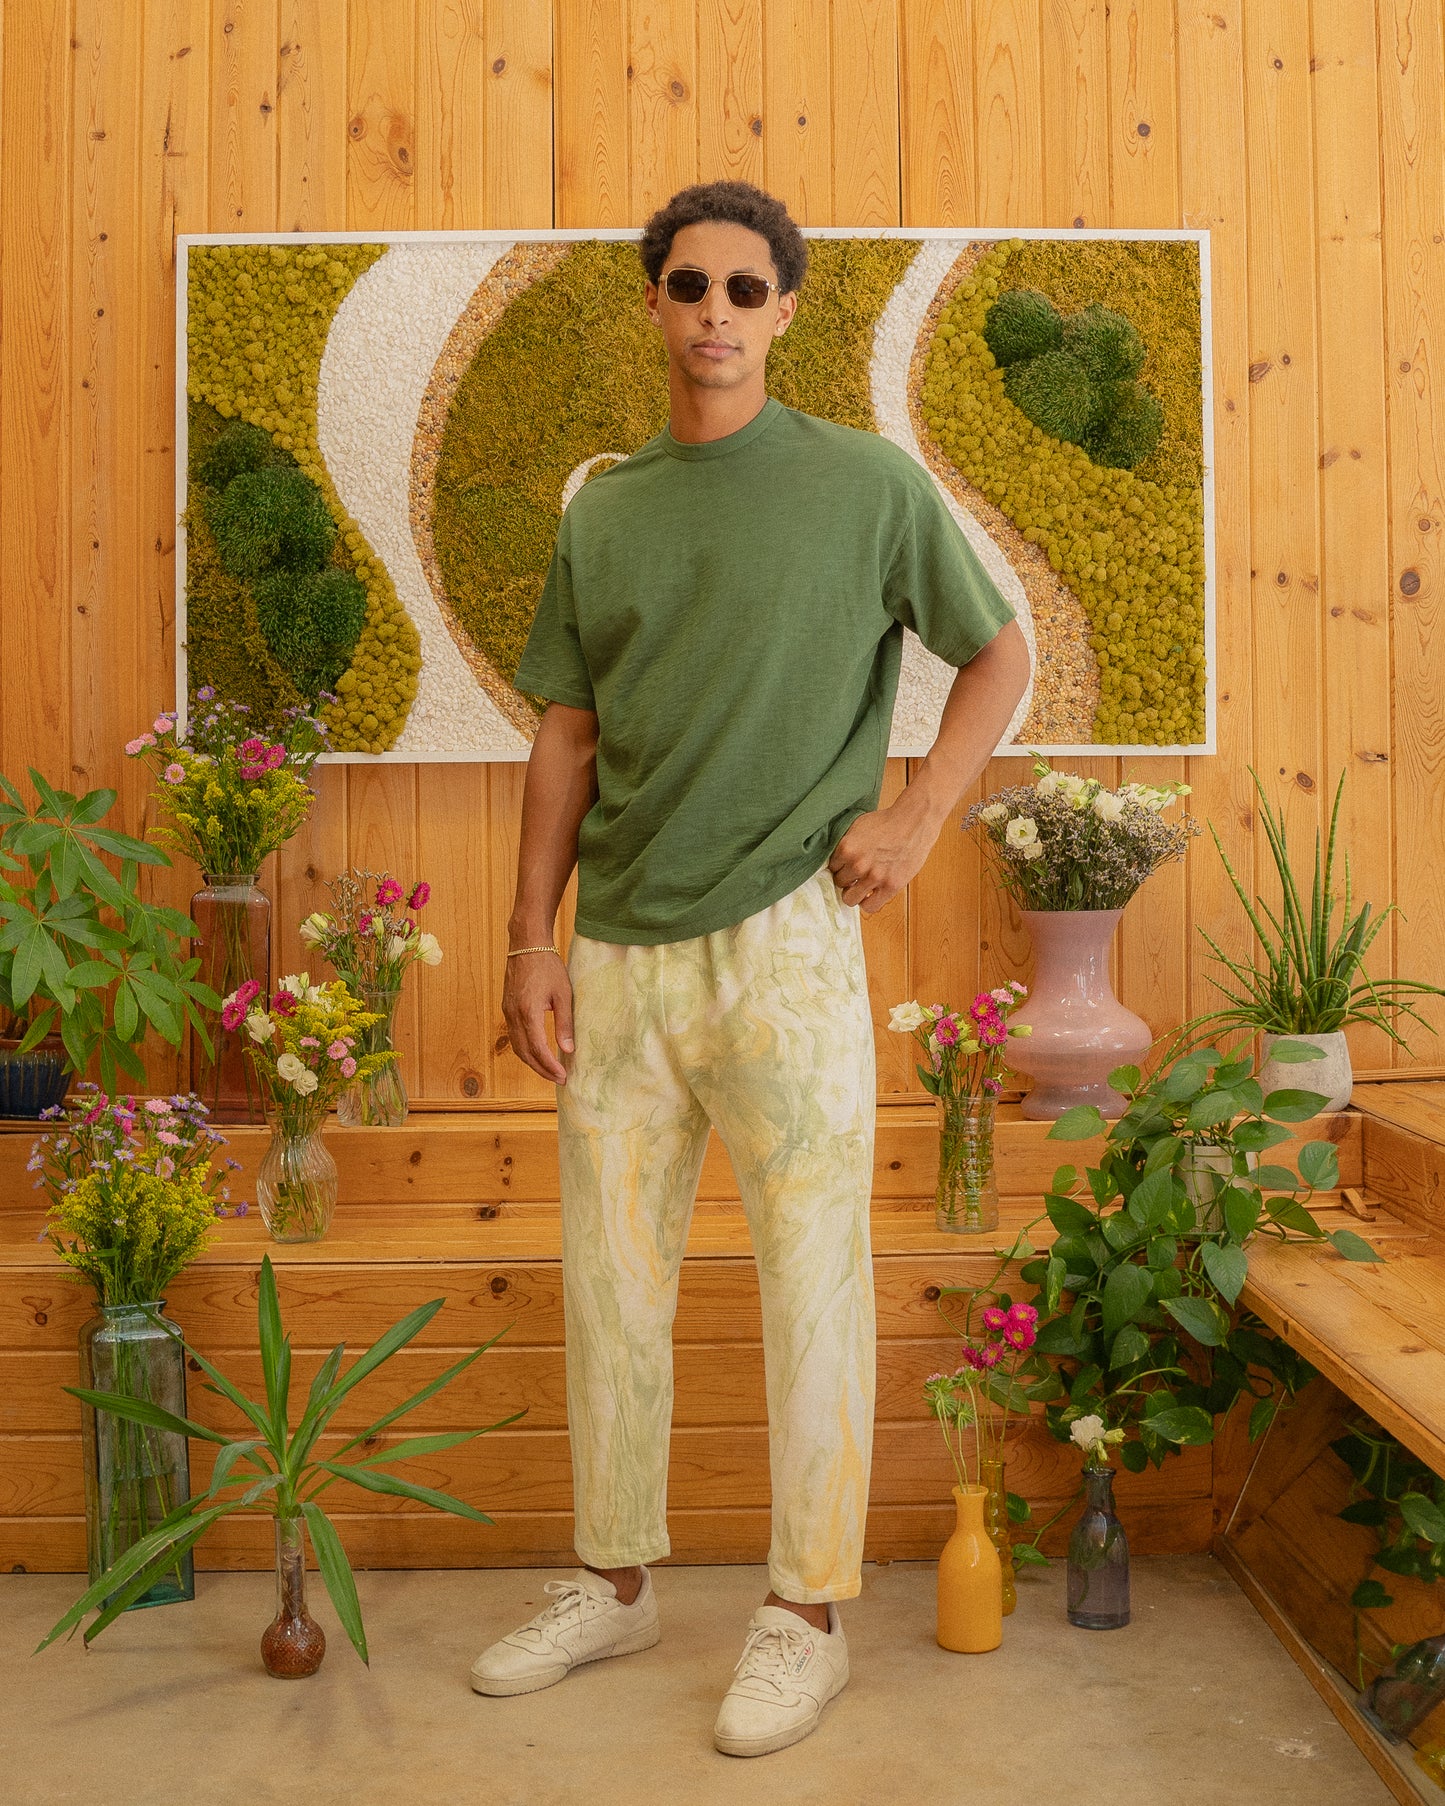 Journey Pant - Daylily Marble